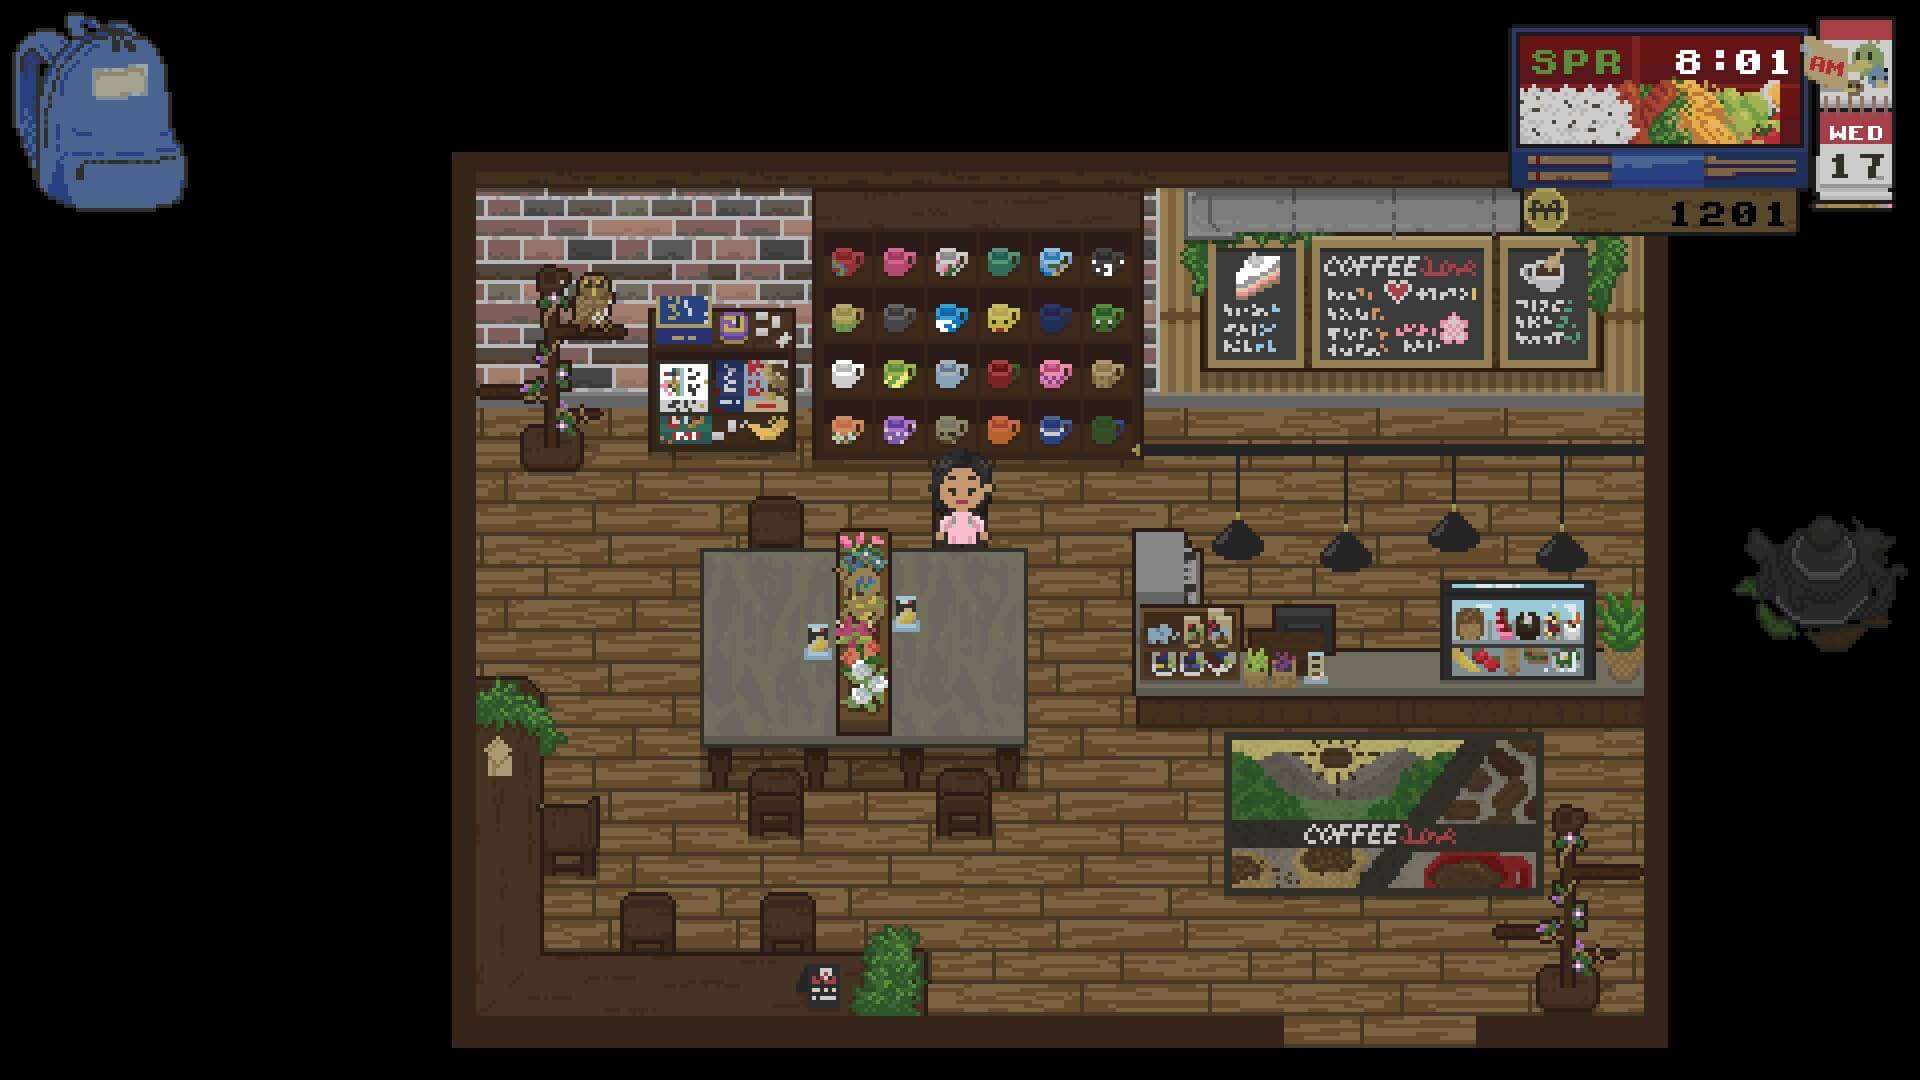 Screencap of Spirittea game play. Player character is sitting at a table in a coffee shop. On the wall there are portraits, as well as a bookcase filled with coloured mugs.